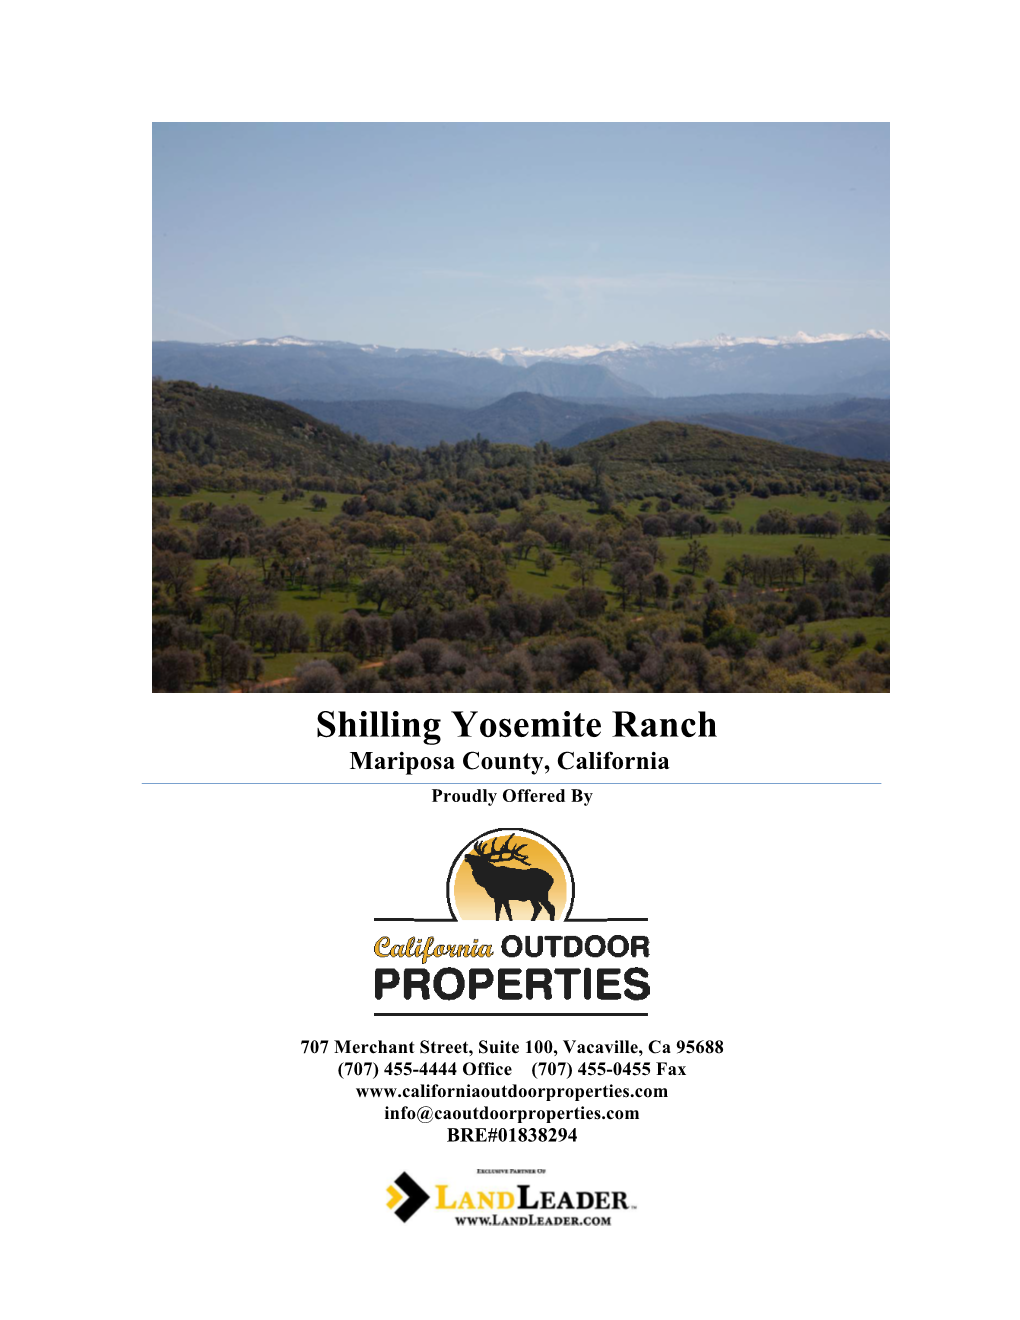 Shilling Yosemite Ranch Mariposa County, California Proudly Offered By